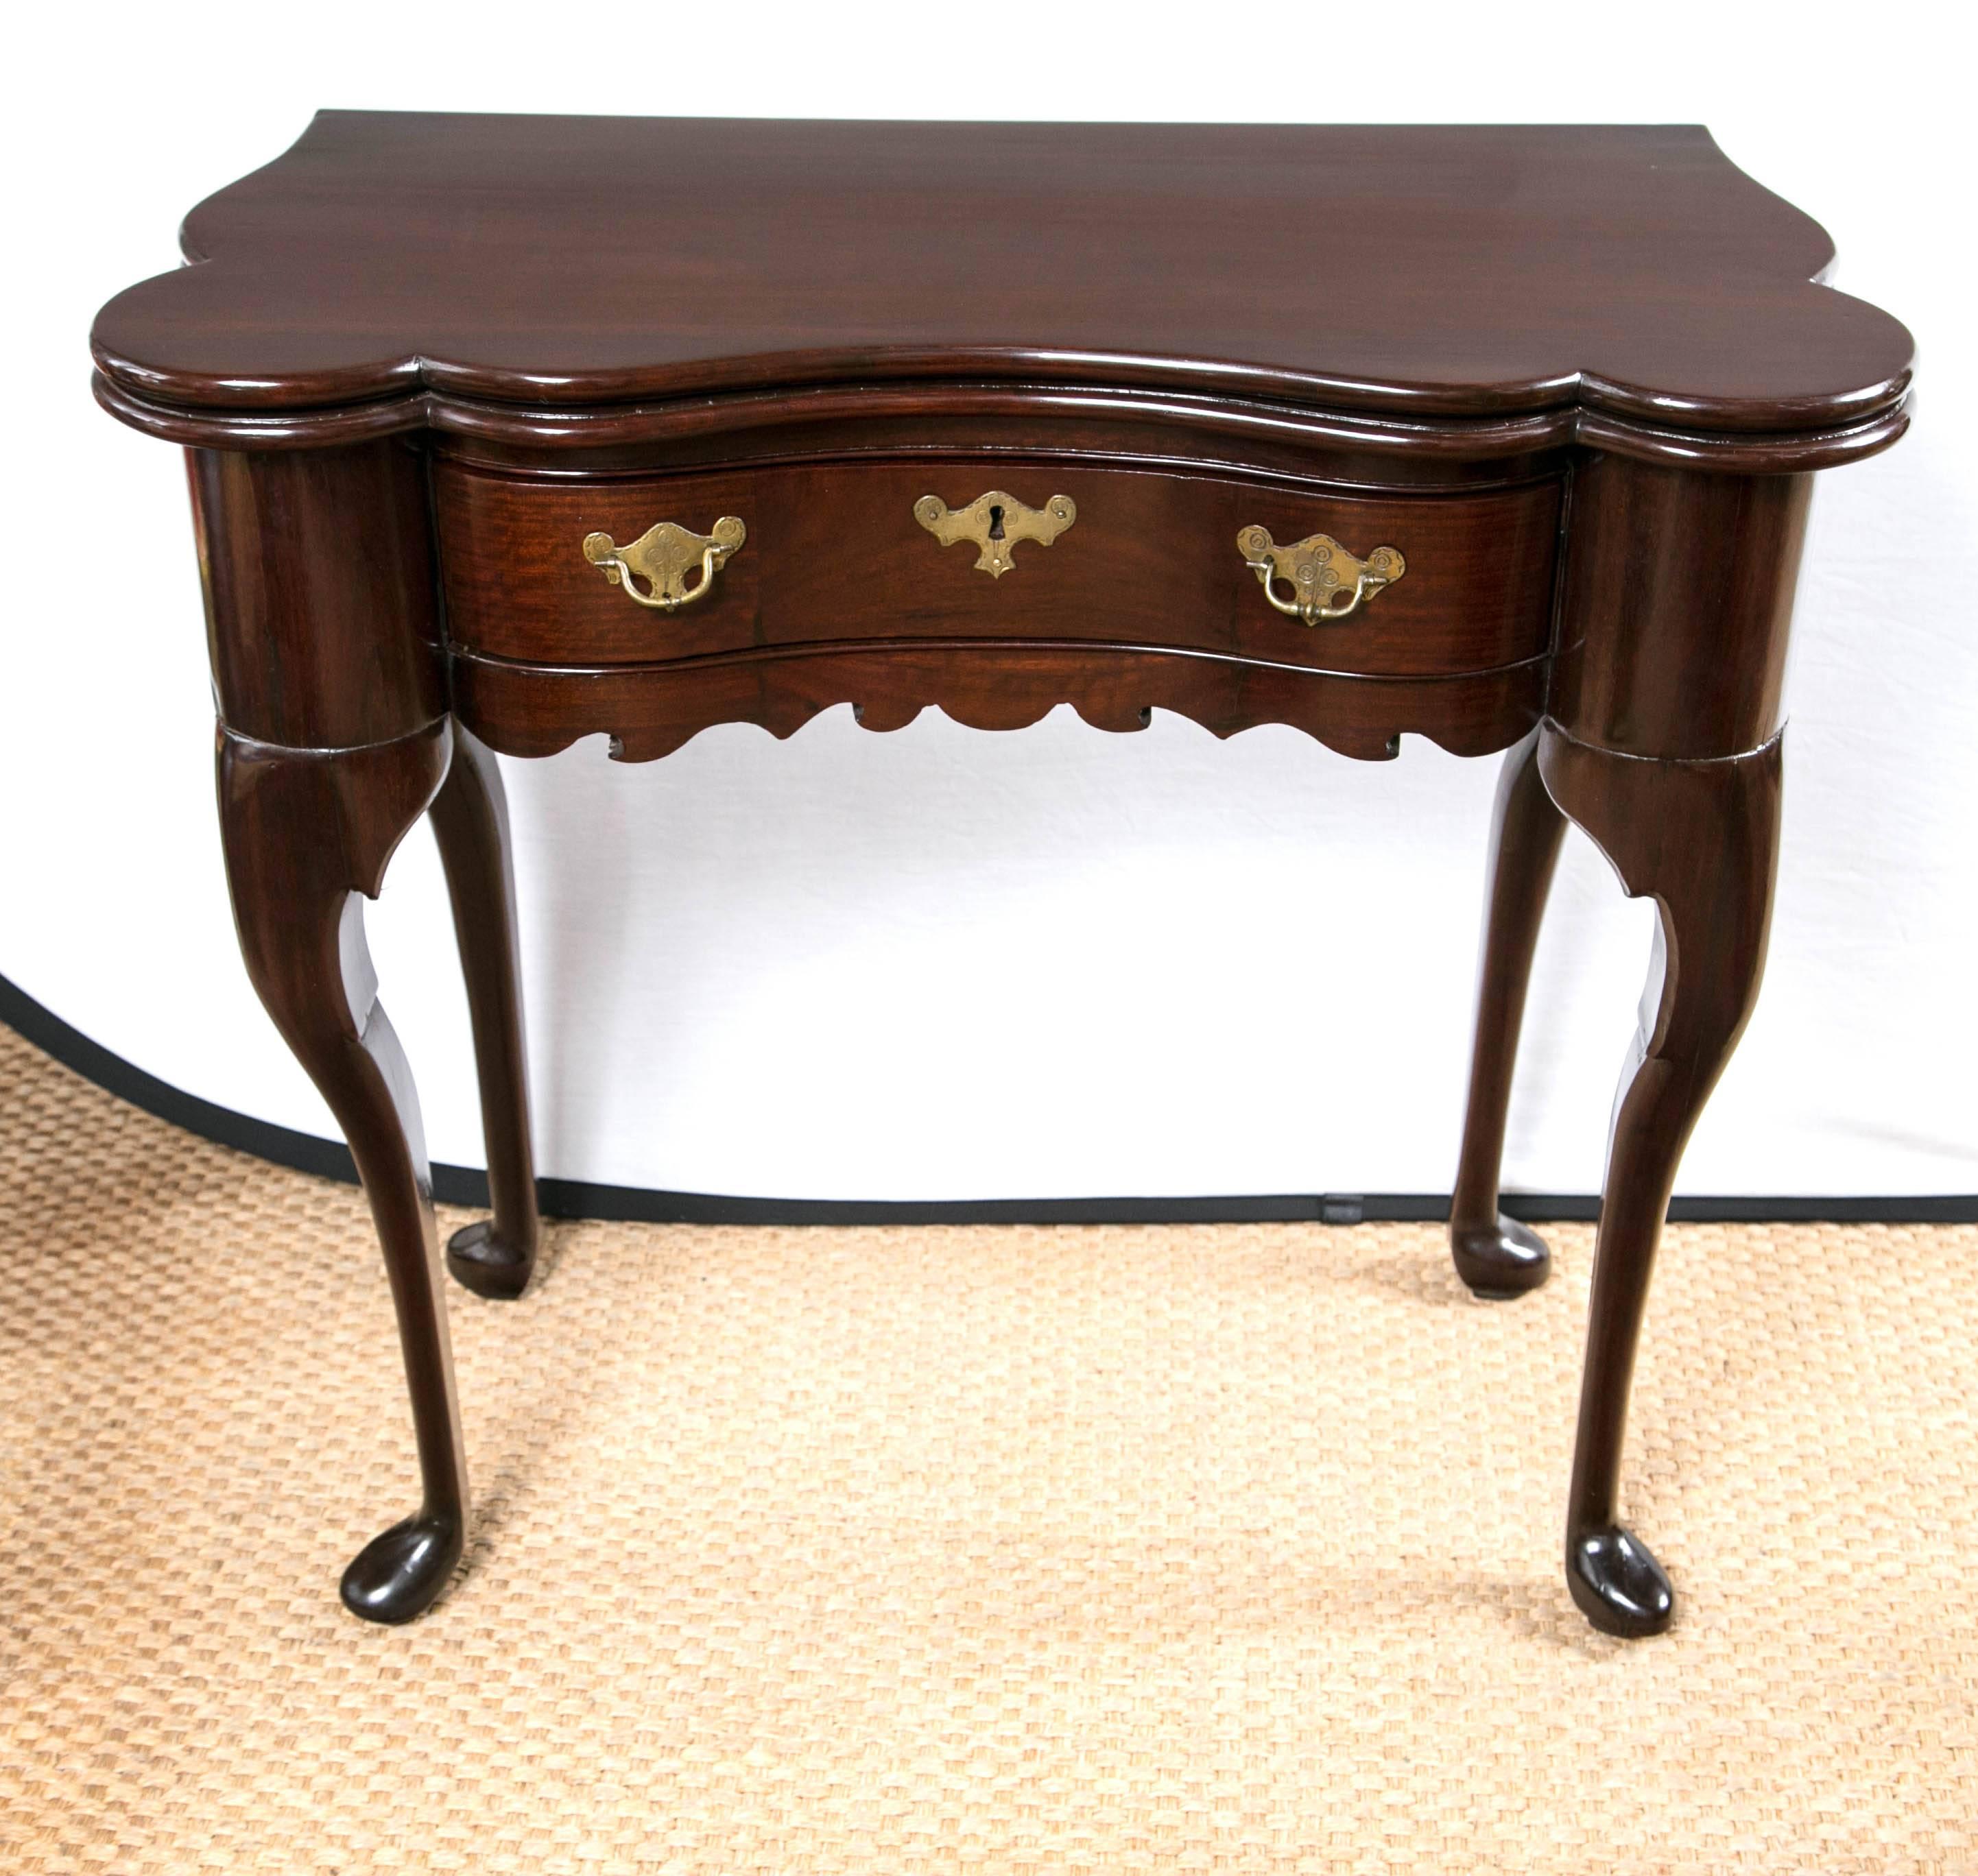 A Fine English game/card table, dating from the 18th century, with a flip-top and lined in green baize. It has deeply rounded corners and concaved front and shaped sides. A single drawer with original pulls and escutcheon. Wave design frieze under